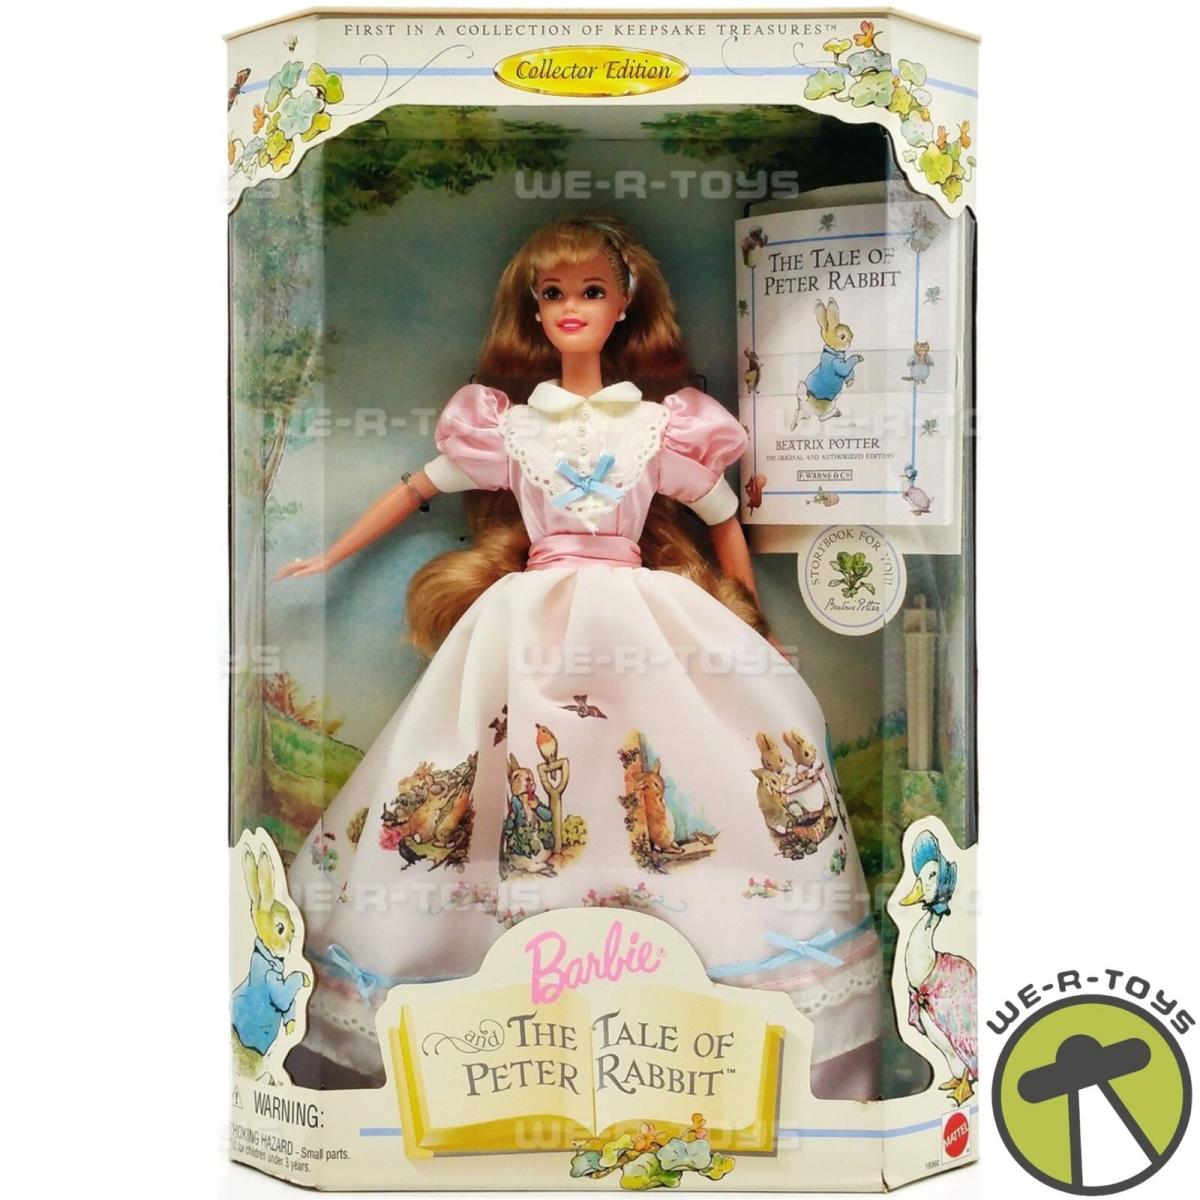 Barbie The Tale of Peter Rabbit Doll Collector Edition 1997 Mattel 19360